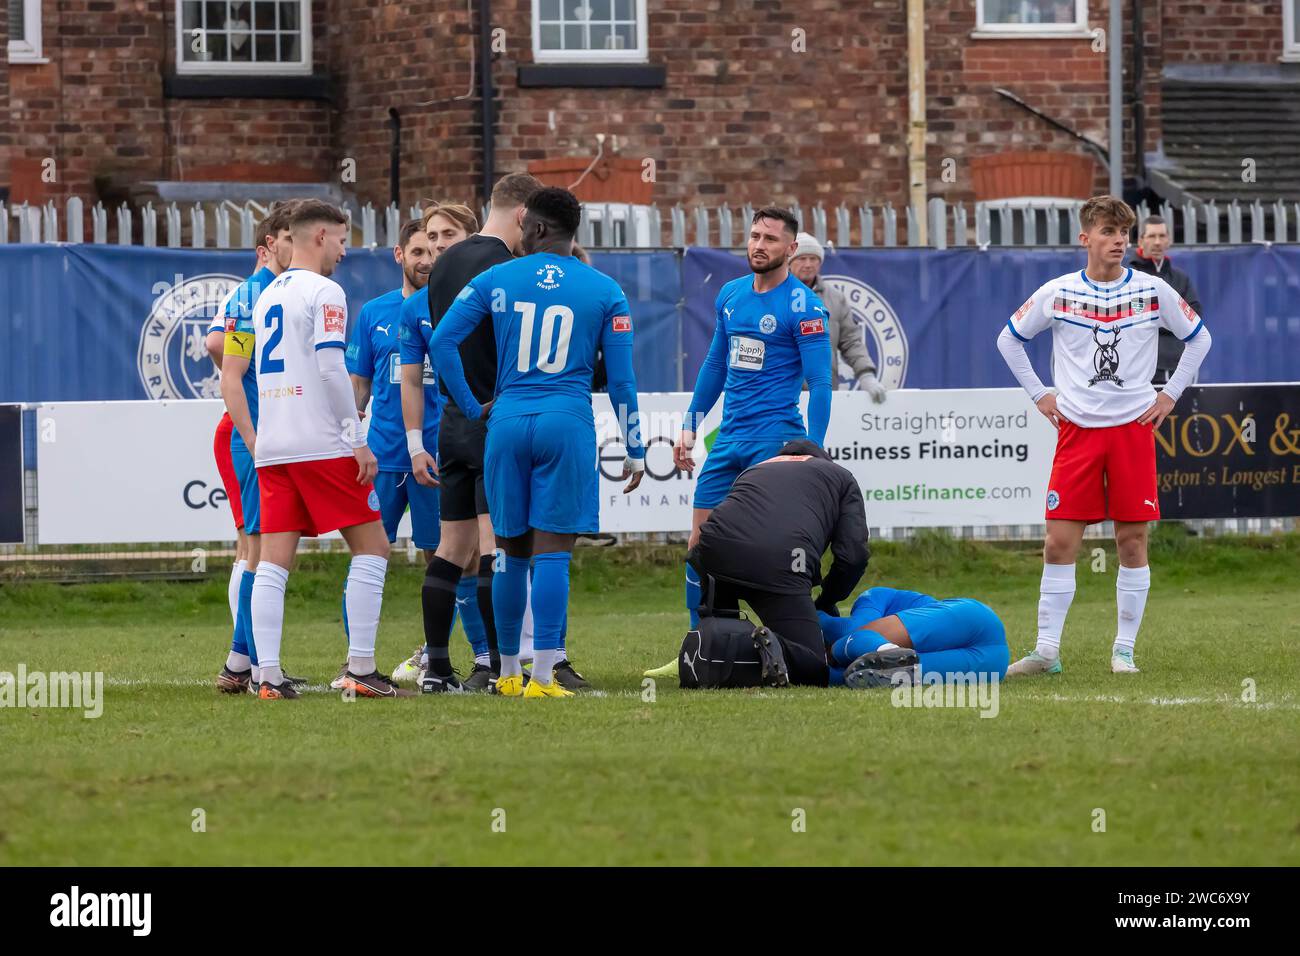 A Warrington Rylands player lies injured on the pitch during a match against Whitby Town at The Hive Stadium, Warrington, Cheshire, England Stock Photo